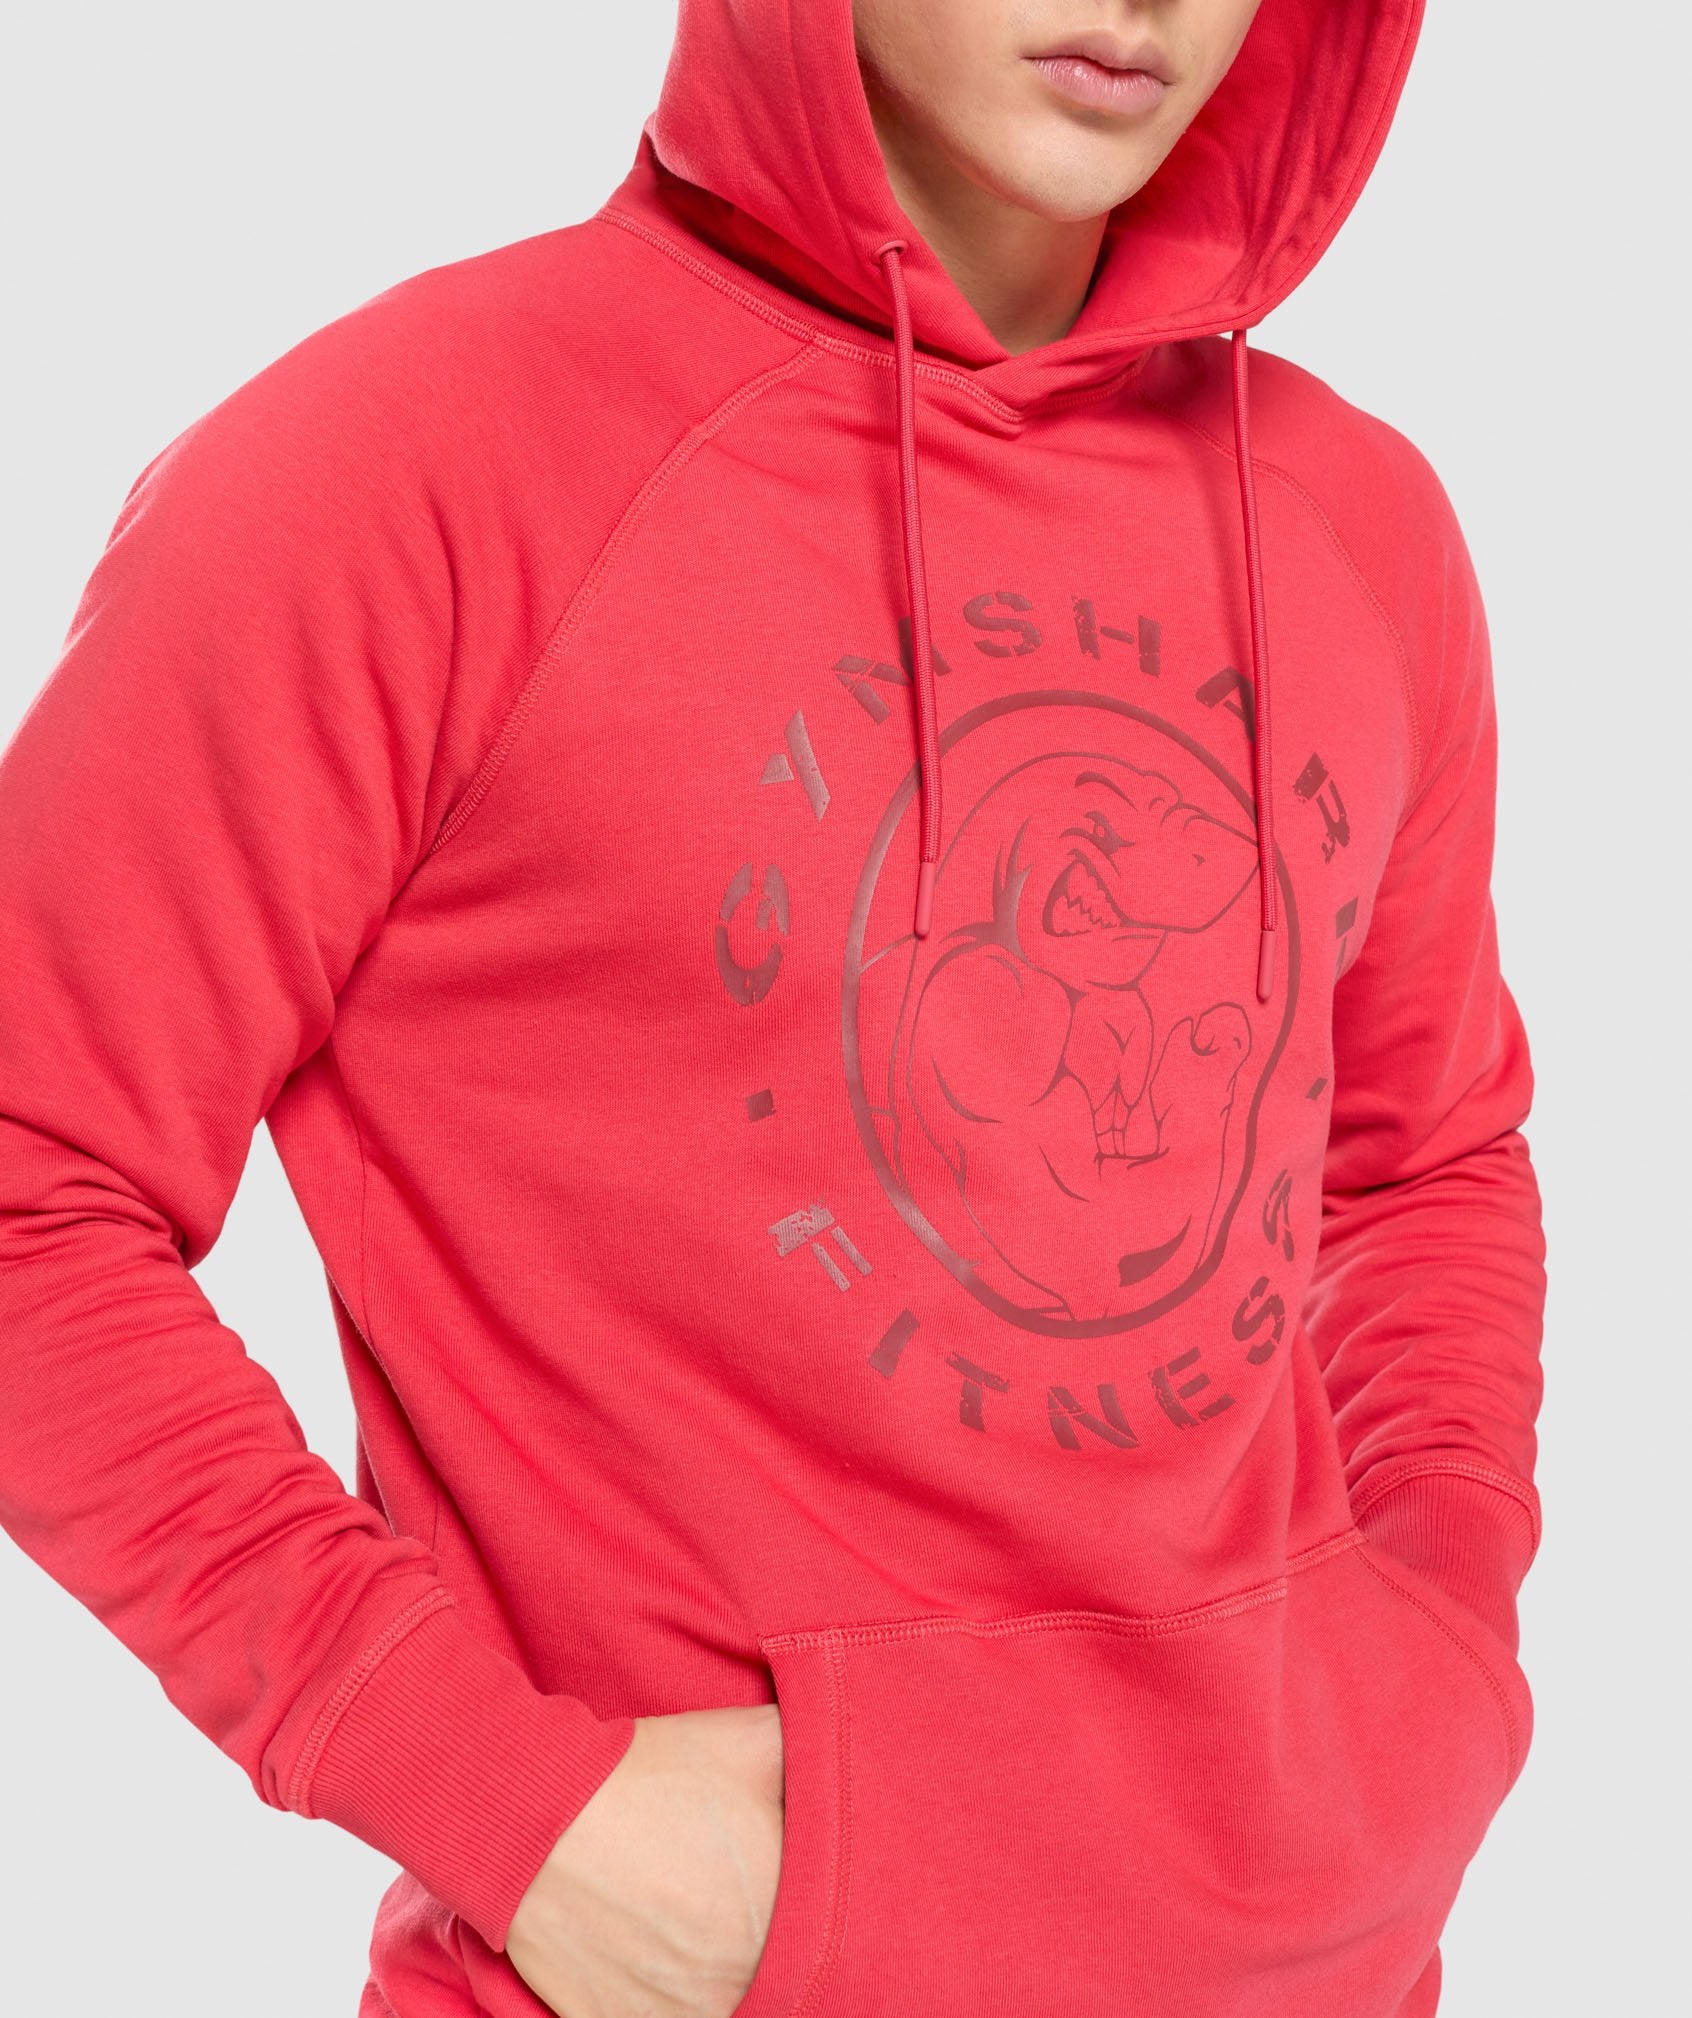 Legacy Hoodie in Red - view 6